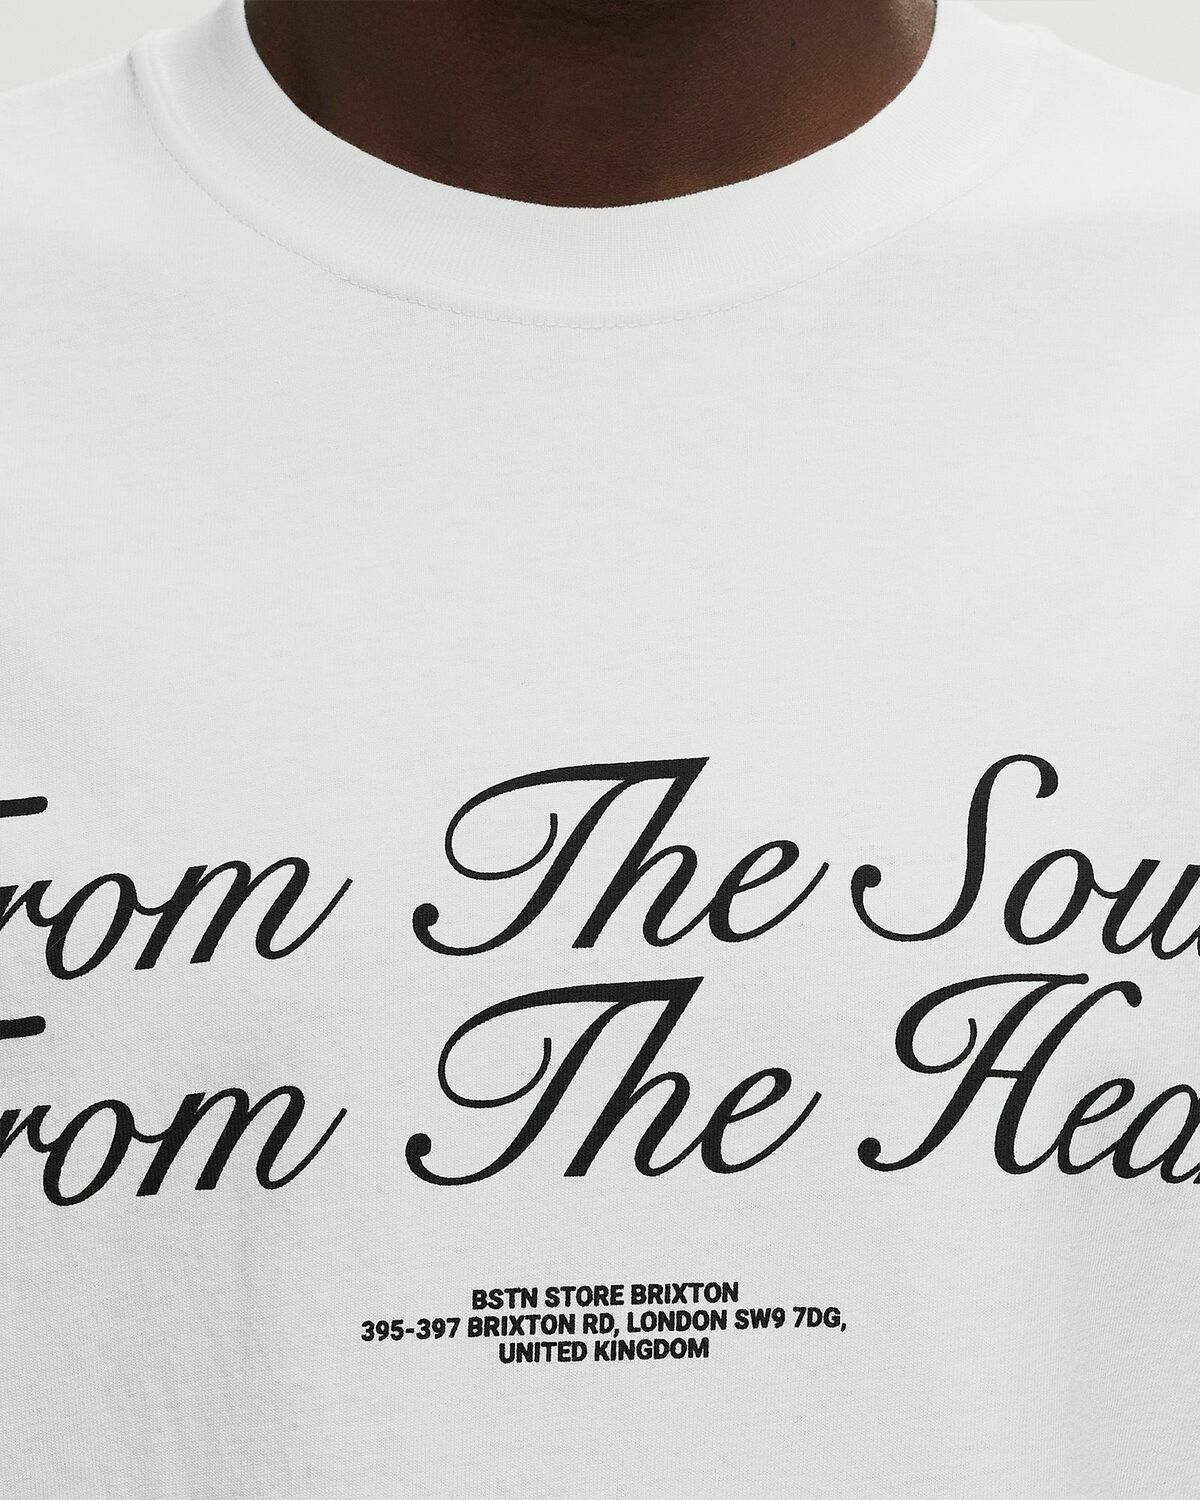 Bstn Brand From The South From The Heart Tee White - Mens - Shortsleeves